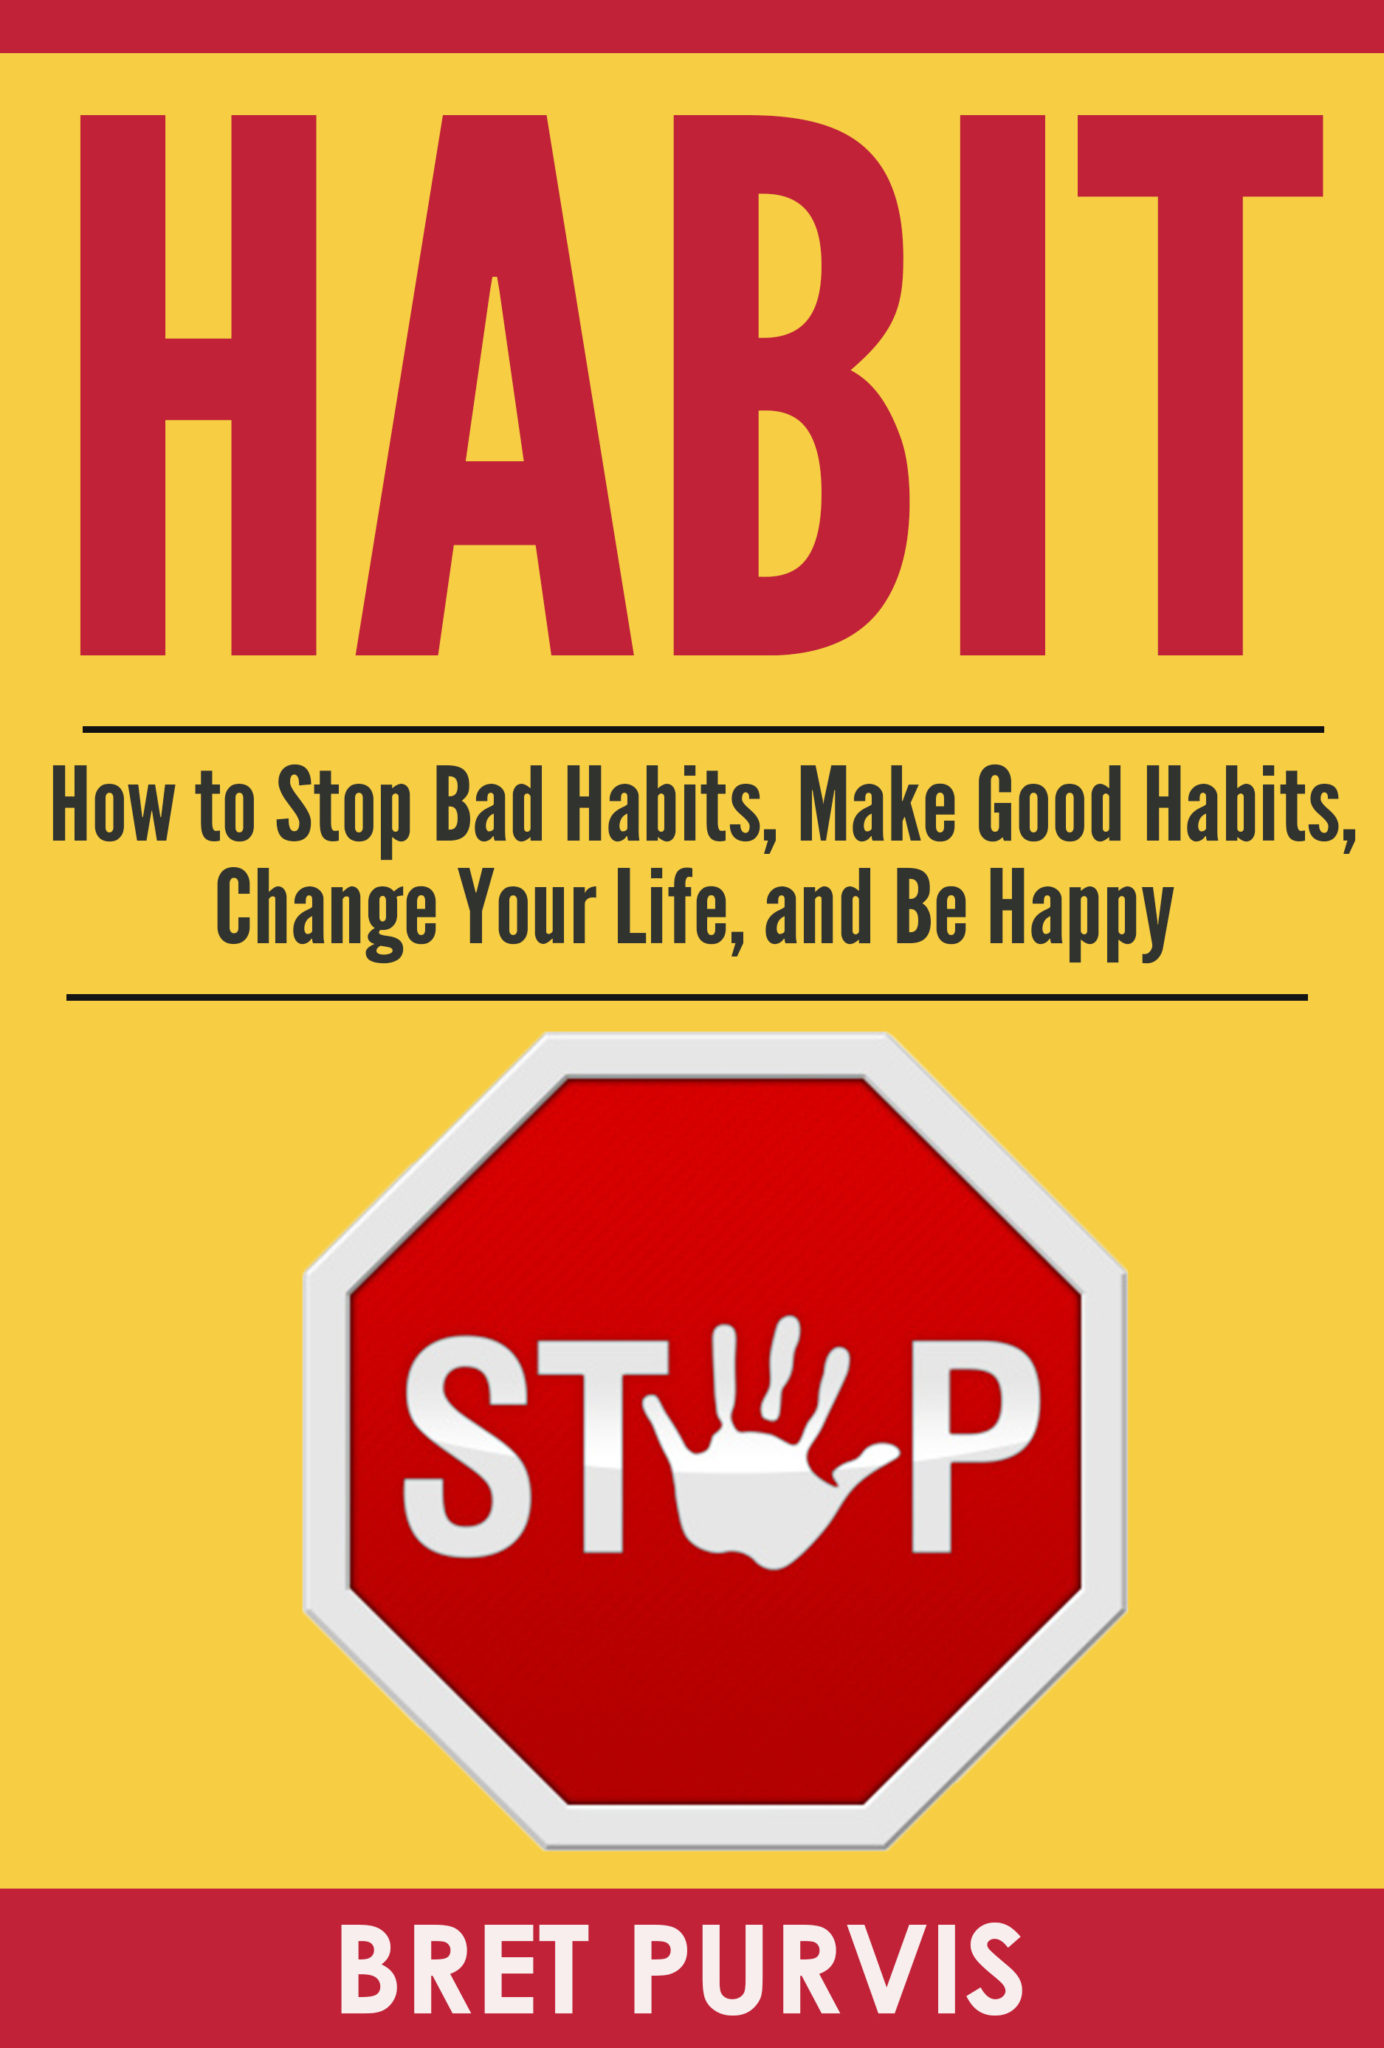 FREE: Habit: How to Stop Bad Habits, Make Good Habits, Change Your Life, and Be Happy by Bret Purvis